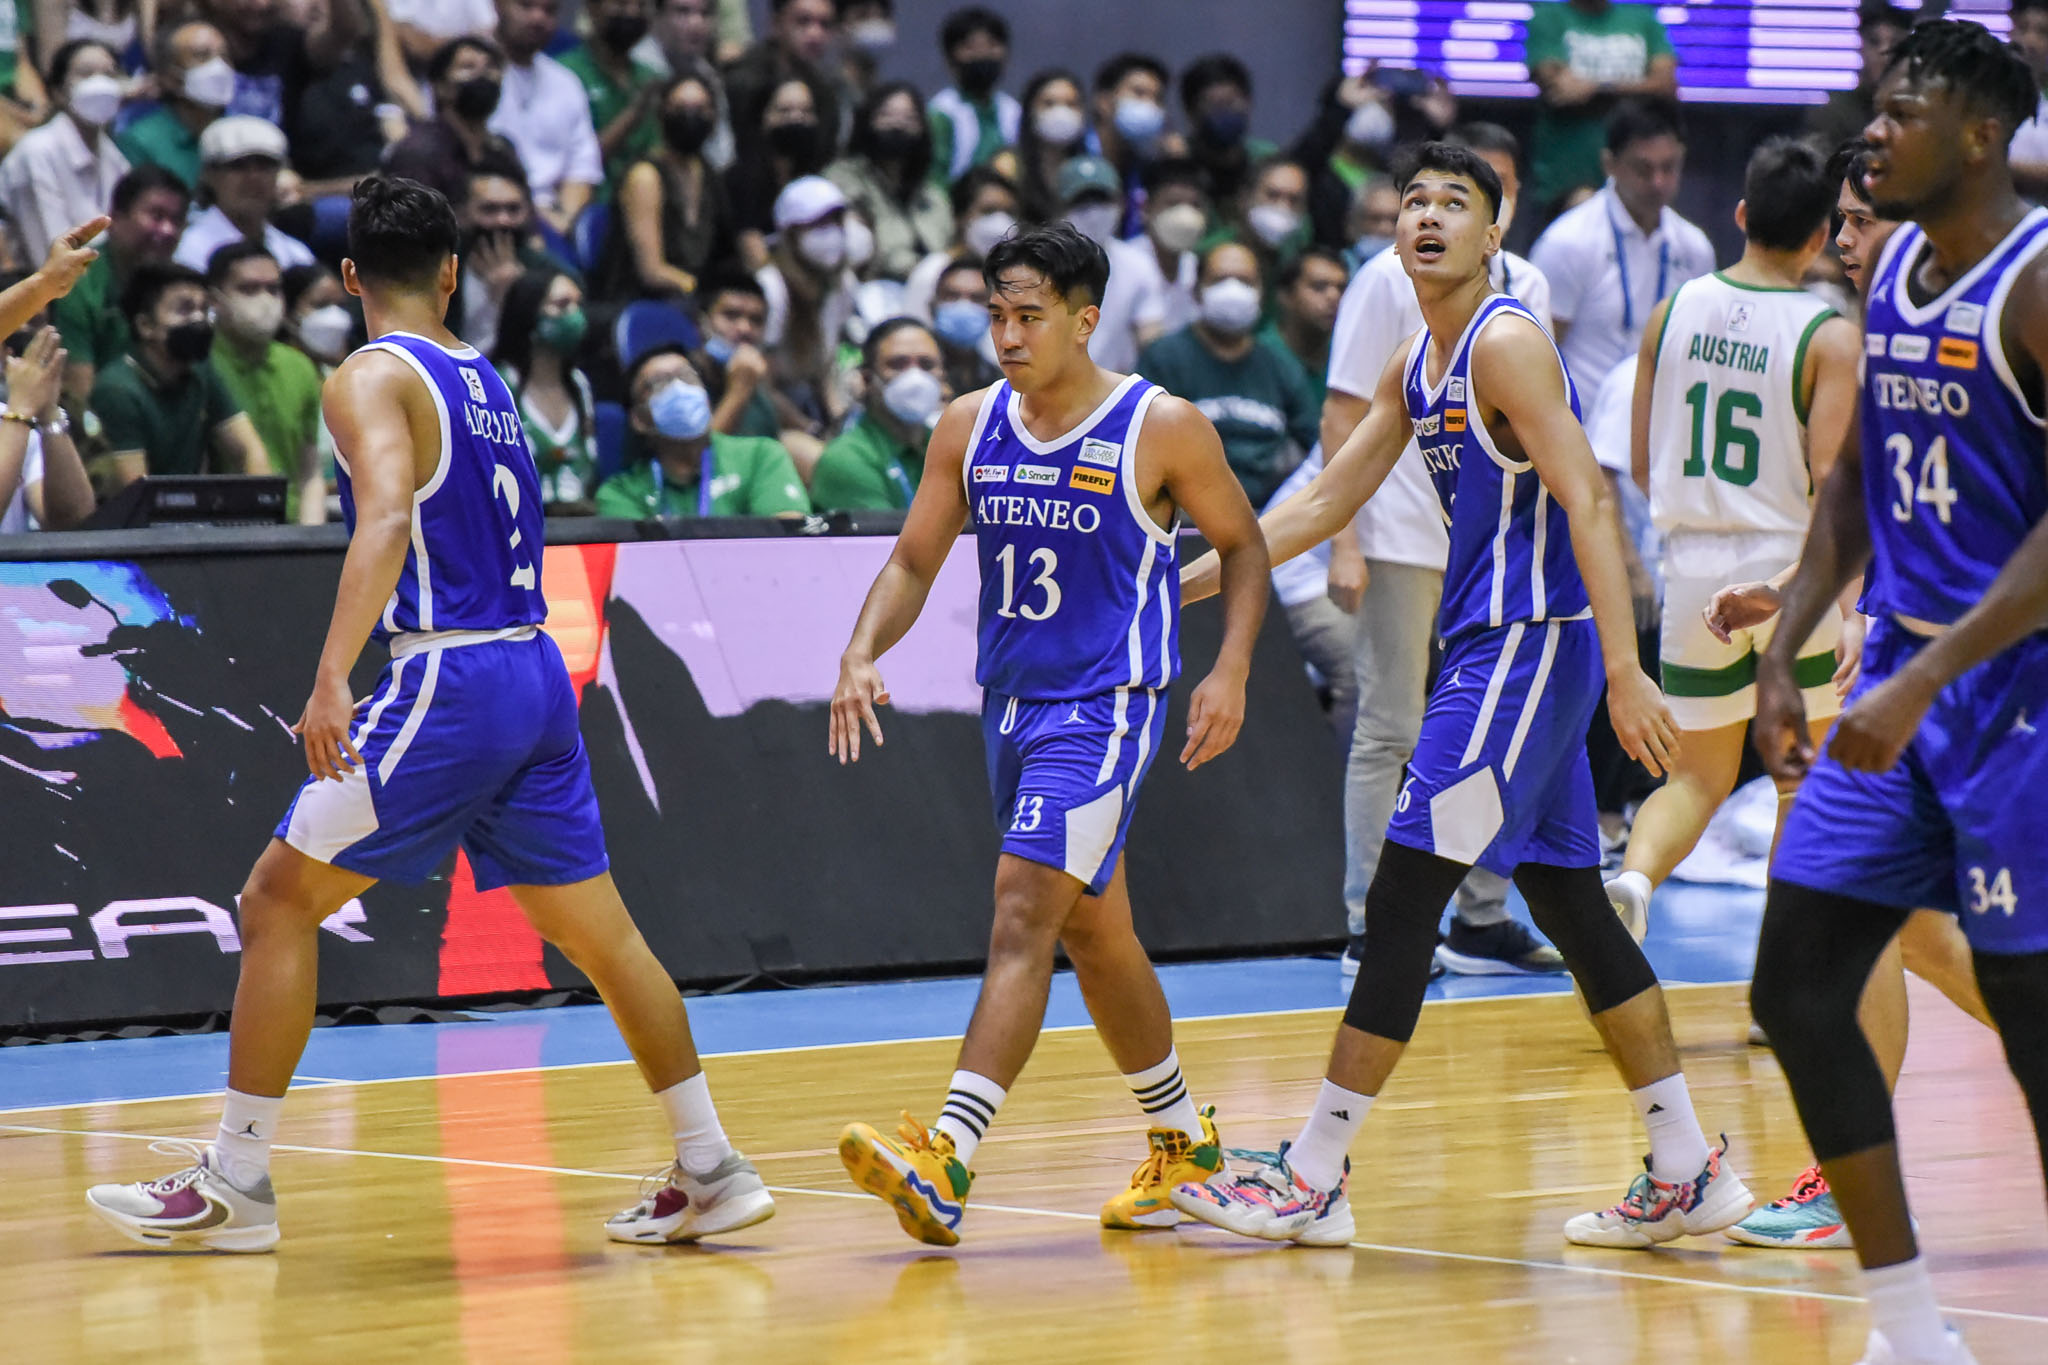 UAAP-85-MBB-DLSU-vs.-ADMU-Gab-Gomez-2837 Gab Gomez proves he can keep up with UP's best guards ADMU Basketball News UAAP  - philippine sports news